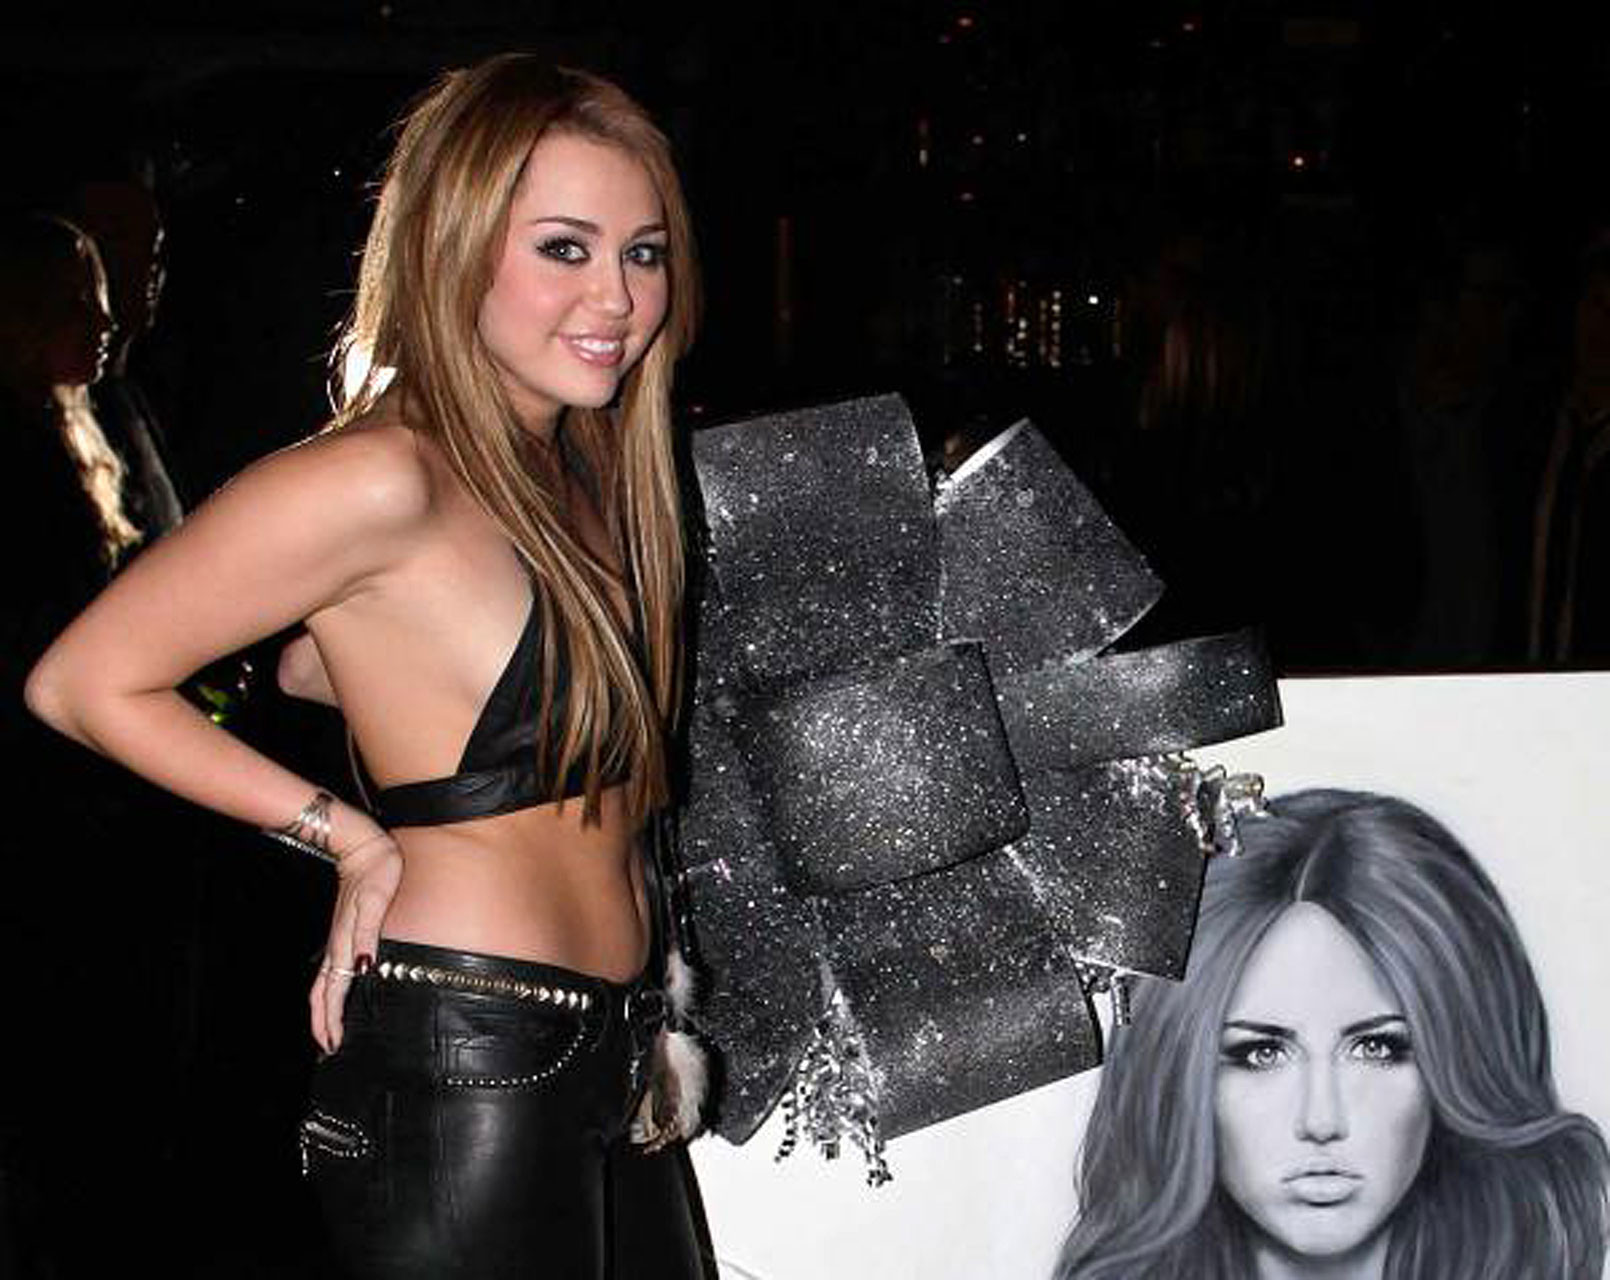 Miley Cyrus young and cute singer celebrated her eighteenth birthday #75325459